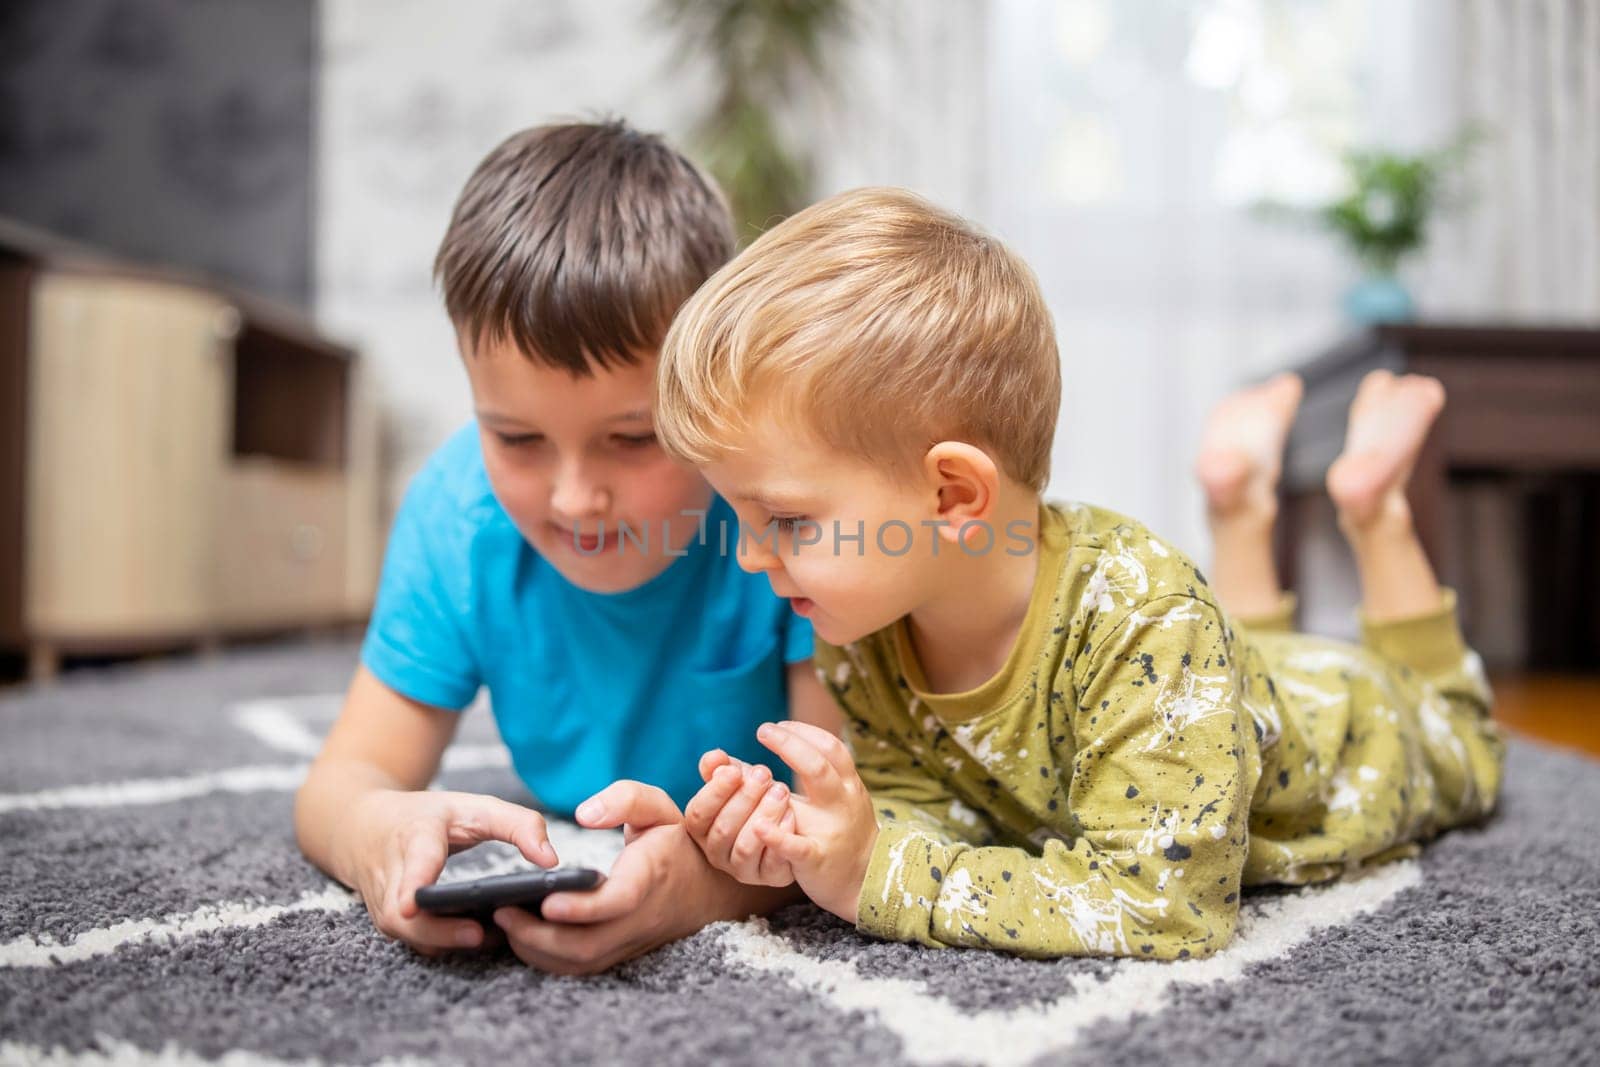 Two young boys lying on carpet using smartphone together by andreyz